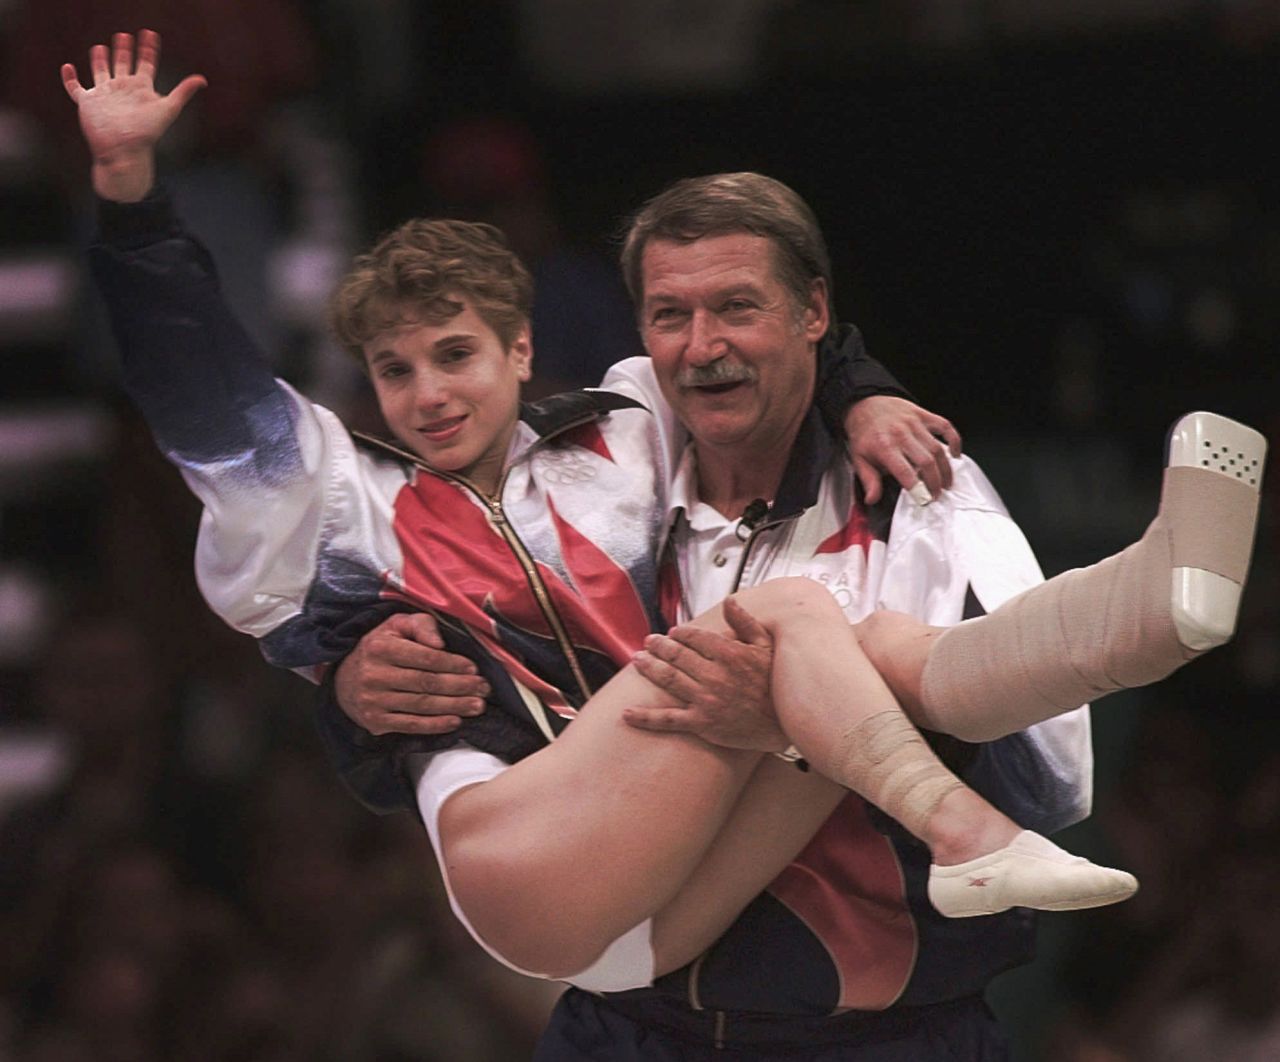 US gymnast Kerri Strug injured her ankle on her second-to-last vault during the team competition at the 1996 Summer Games. But with a gold medal in the balance, she still had to go once more and land on her feet. She did just that, clinching victory and making her an American hero.